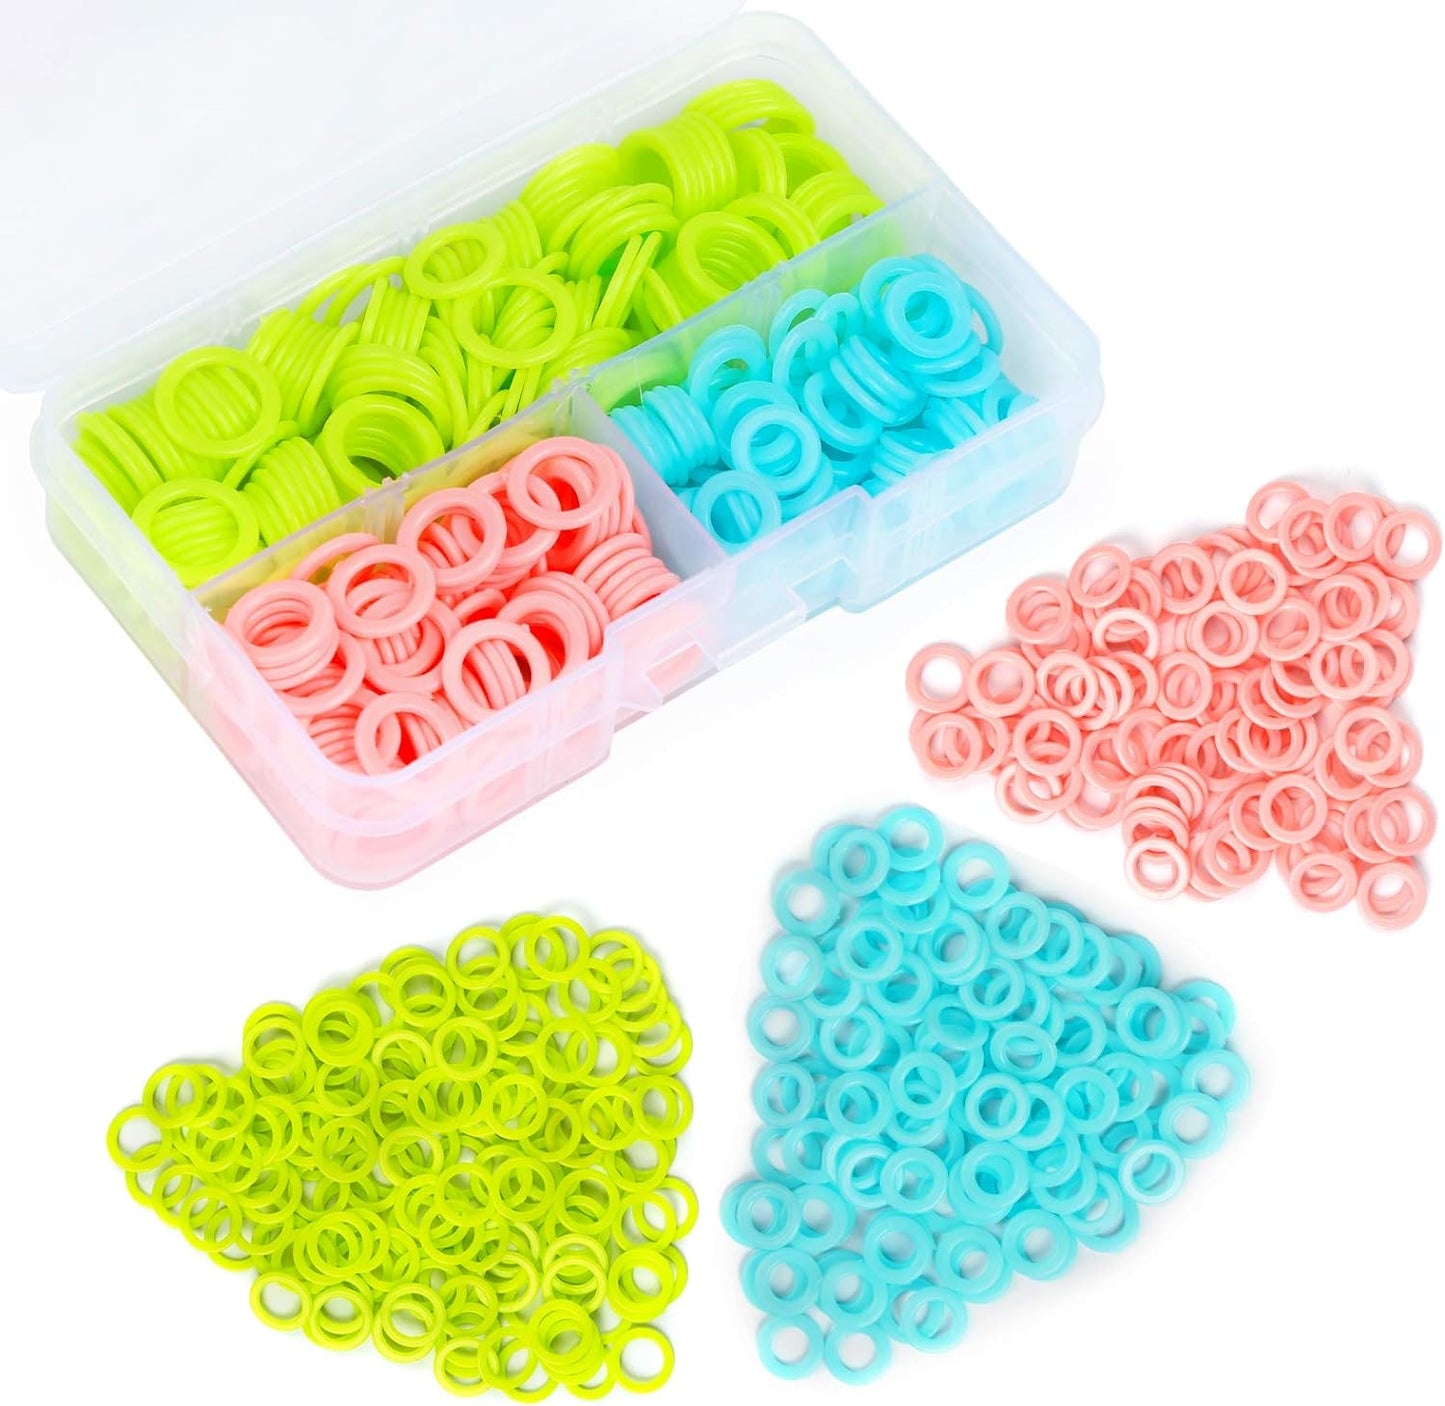 220 Pcs Random Colors O-Rings, Stitch Markers Rings(S/M/L) Crochet Locking Stitch Ring for Knitting/Crochet/Etc with 1 Pcs Storage Box